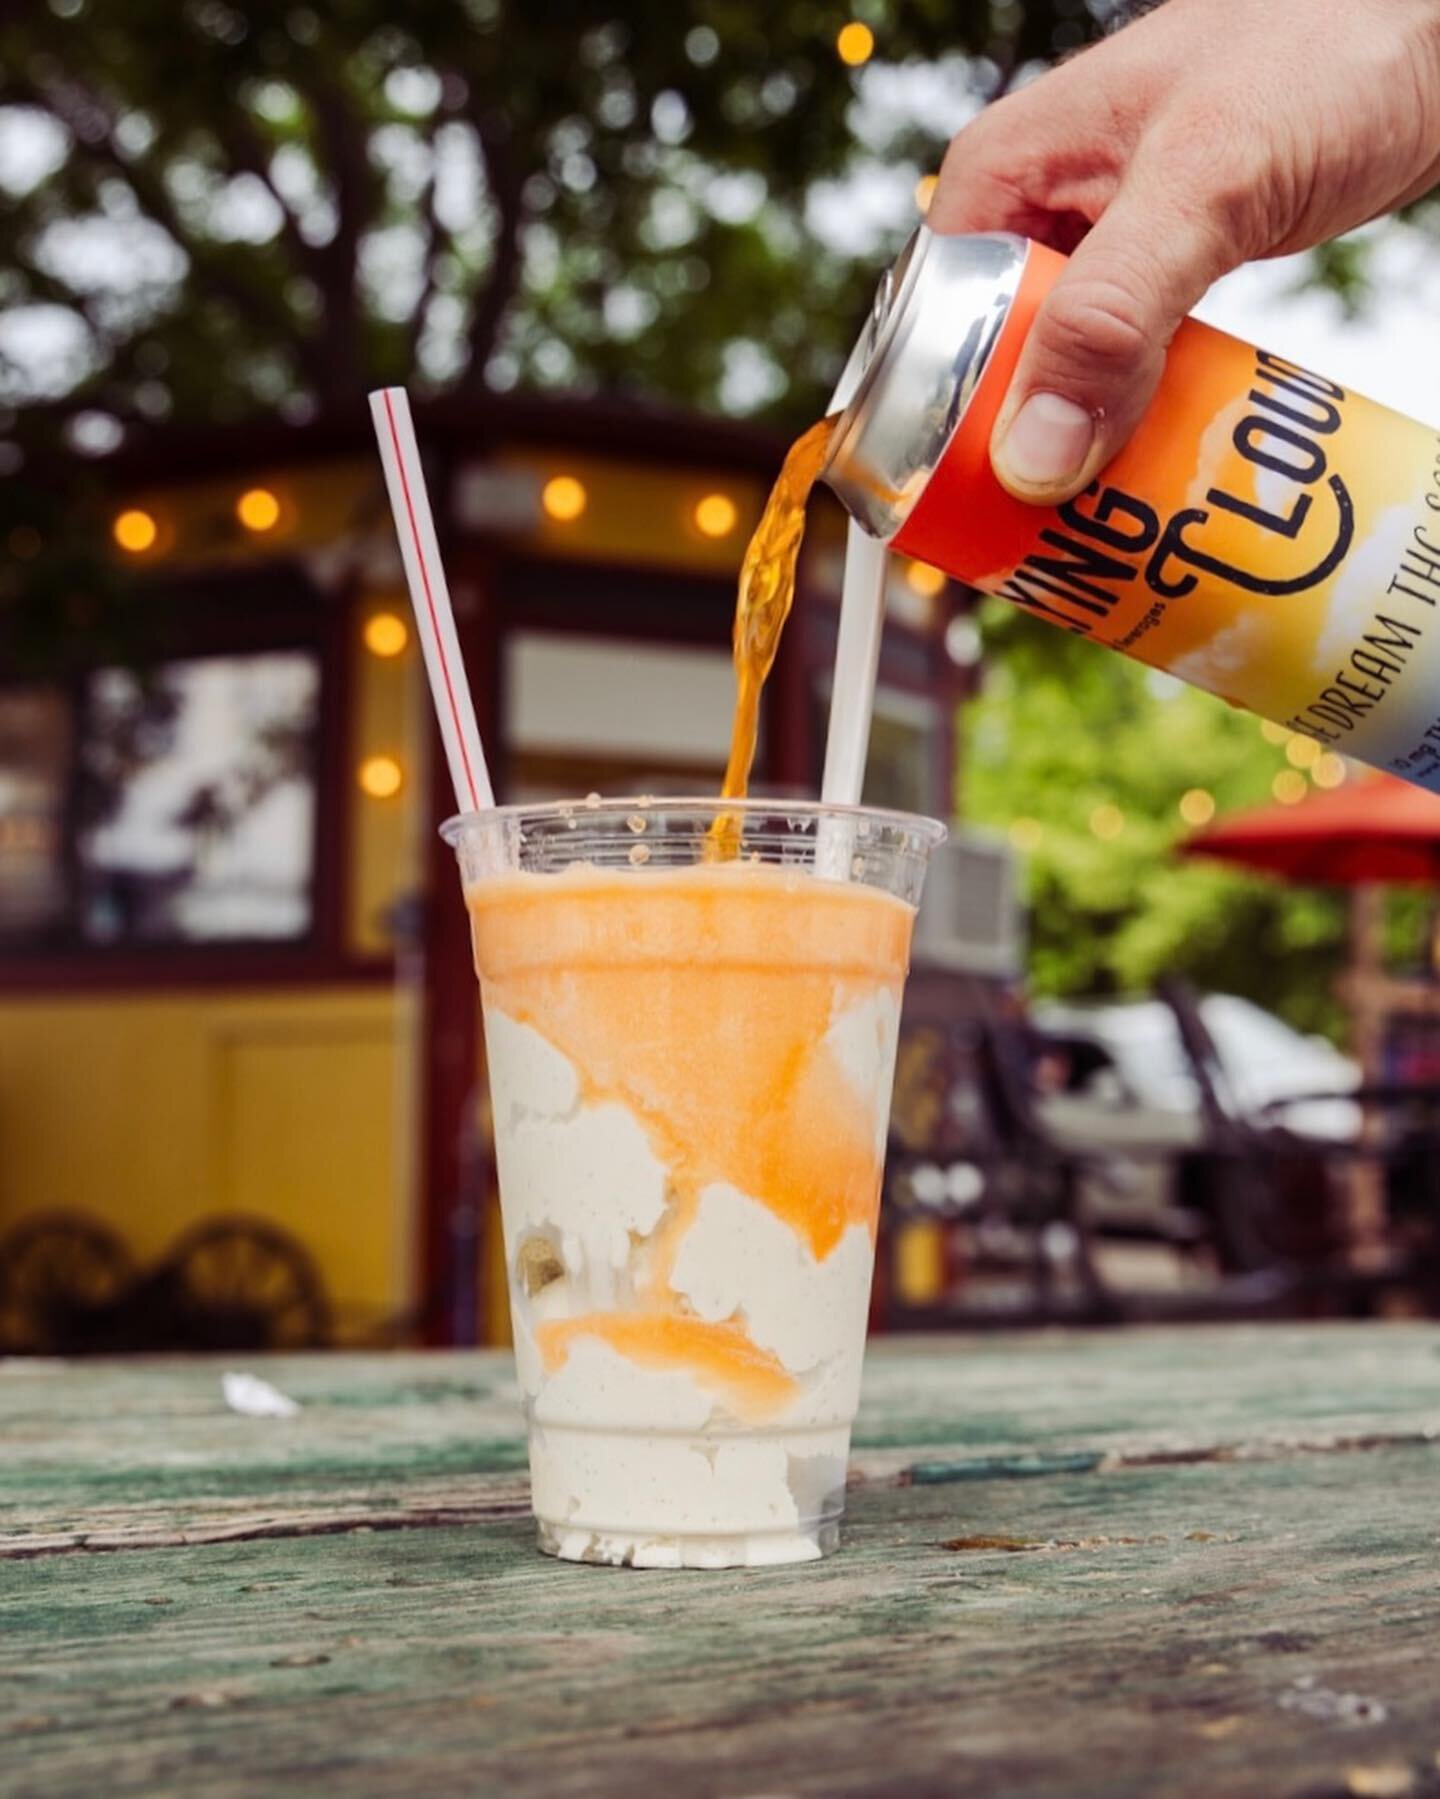 A 🍃special🍃 orange dream float for the ripe summer days🍊☀️